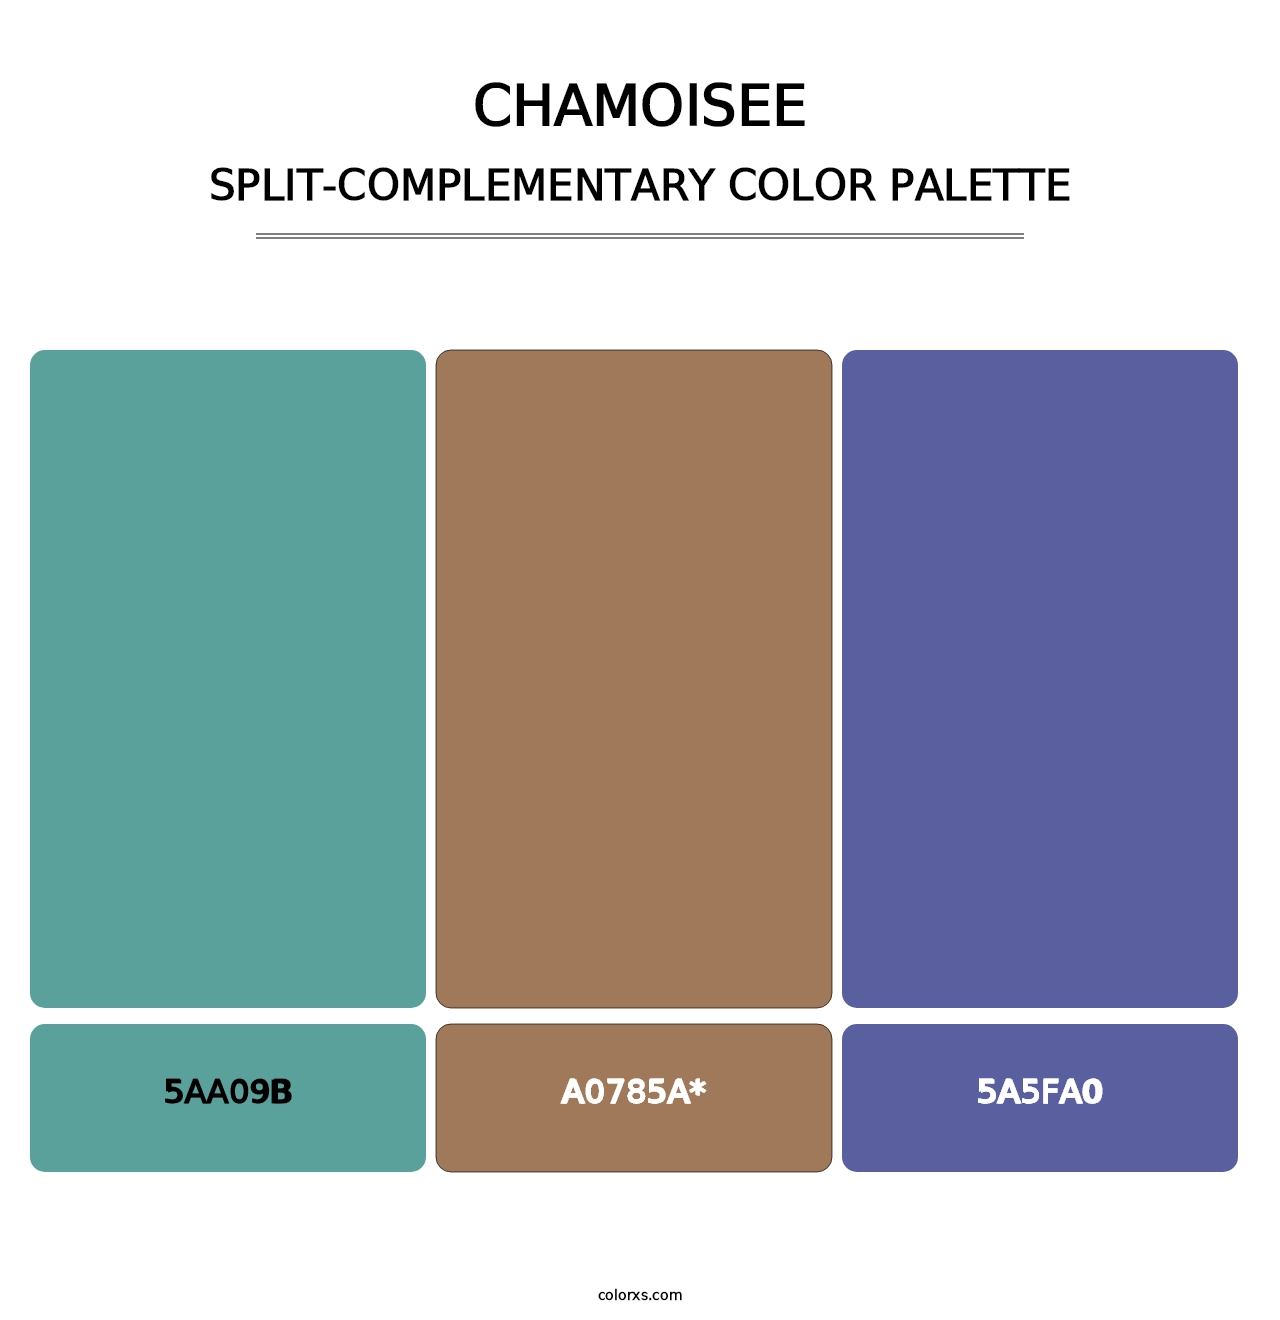 Chamoisee - Split-Complementary Color Palette